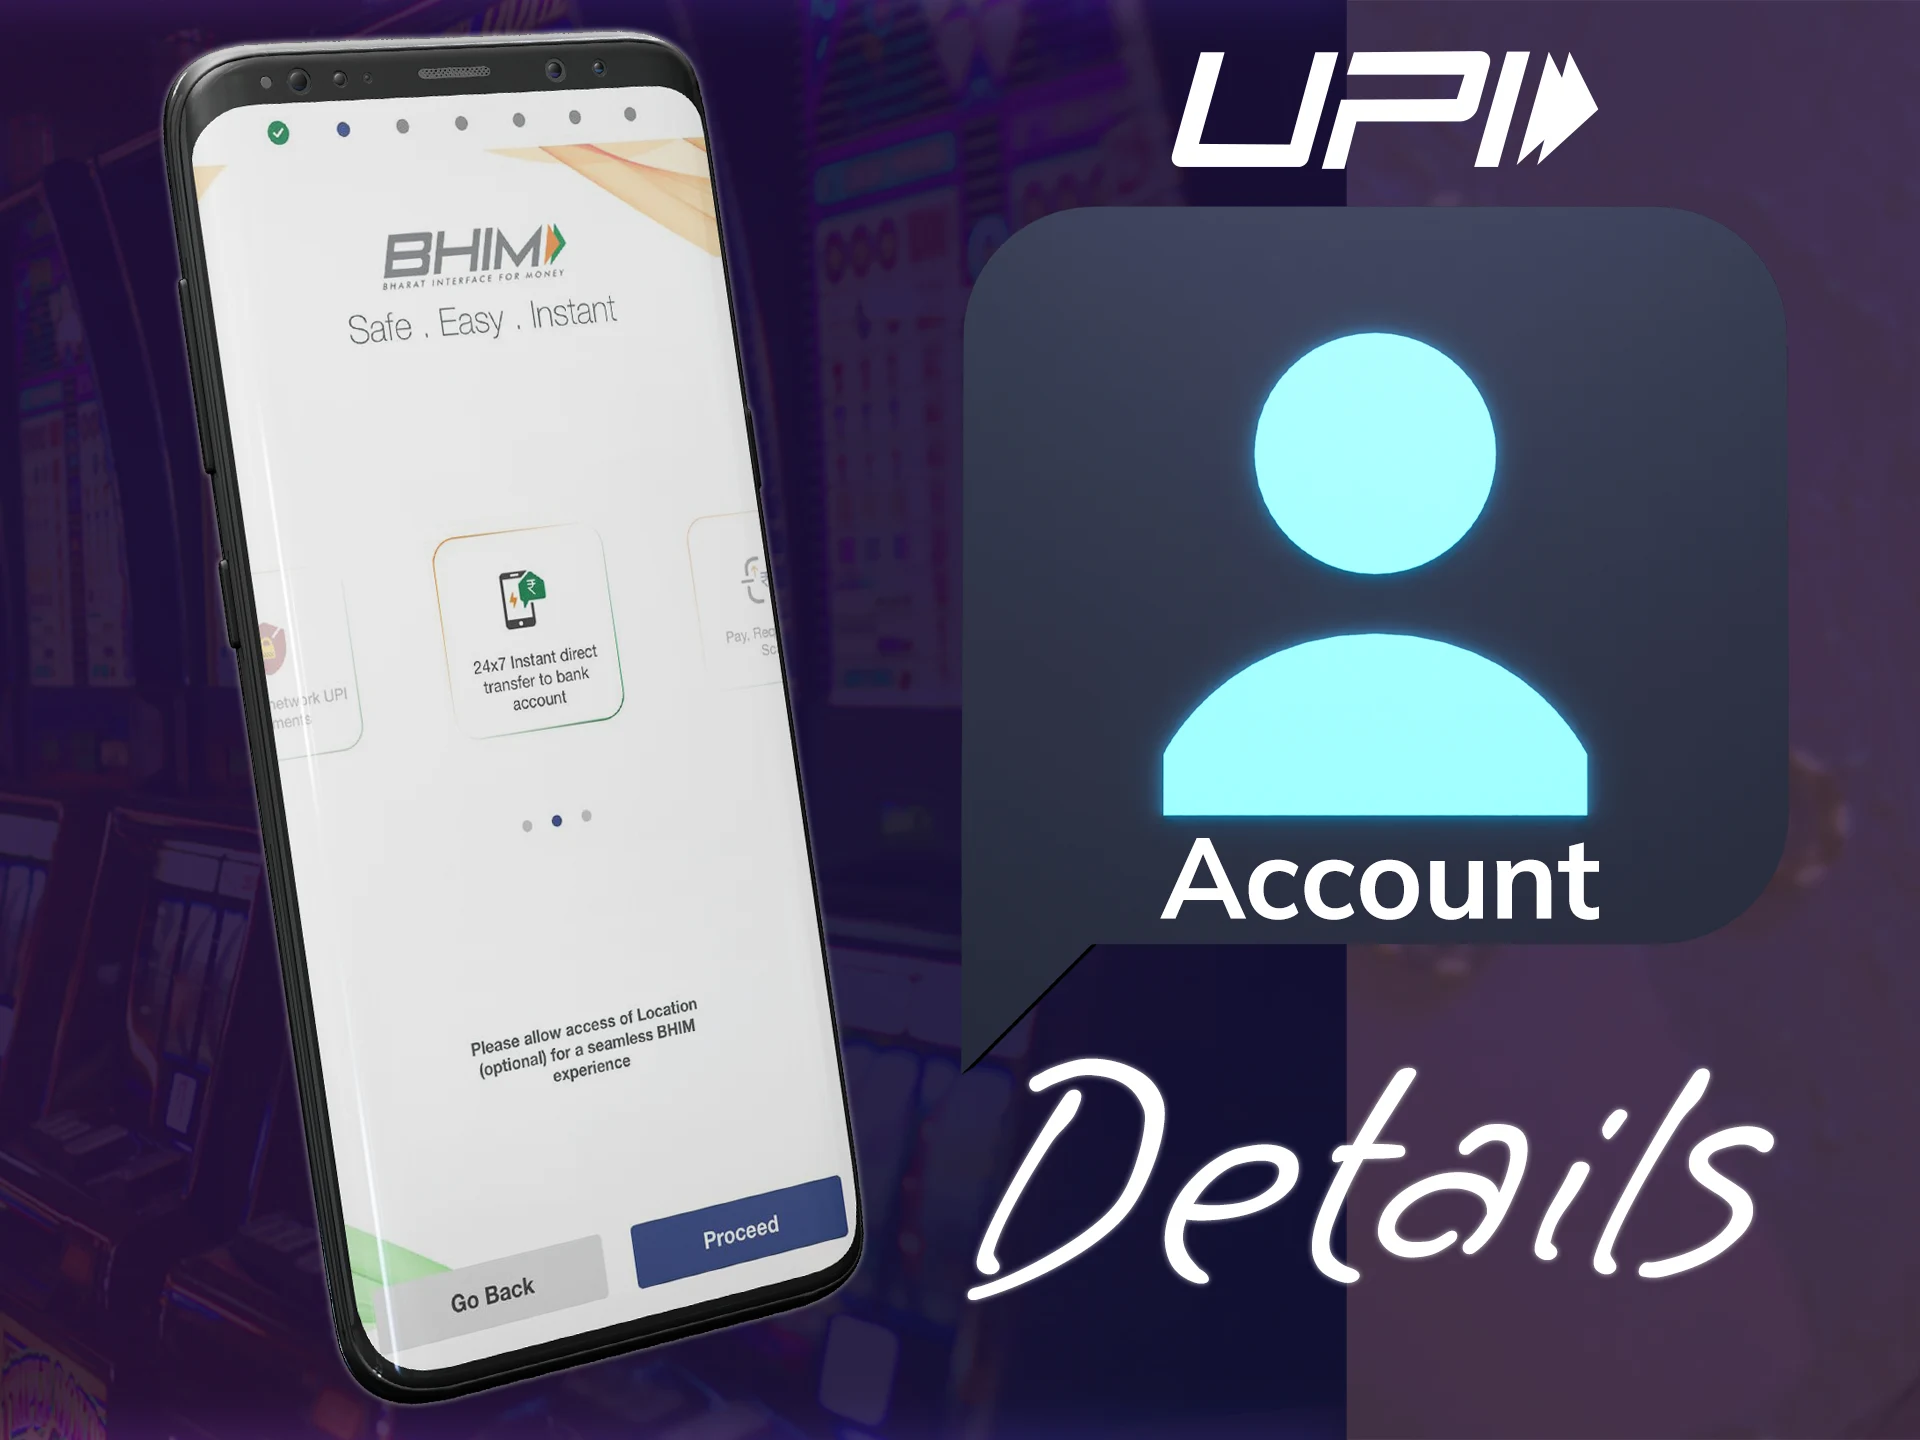 Create an account to make payments in the UPI system.